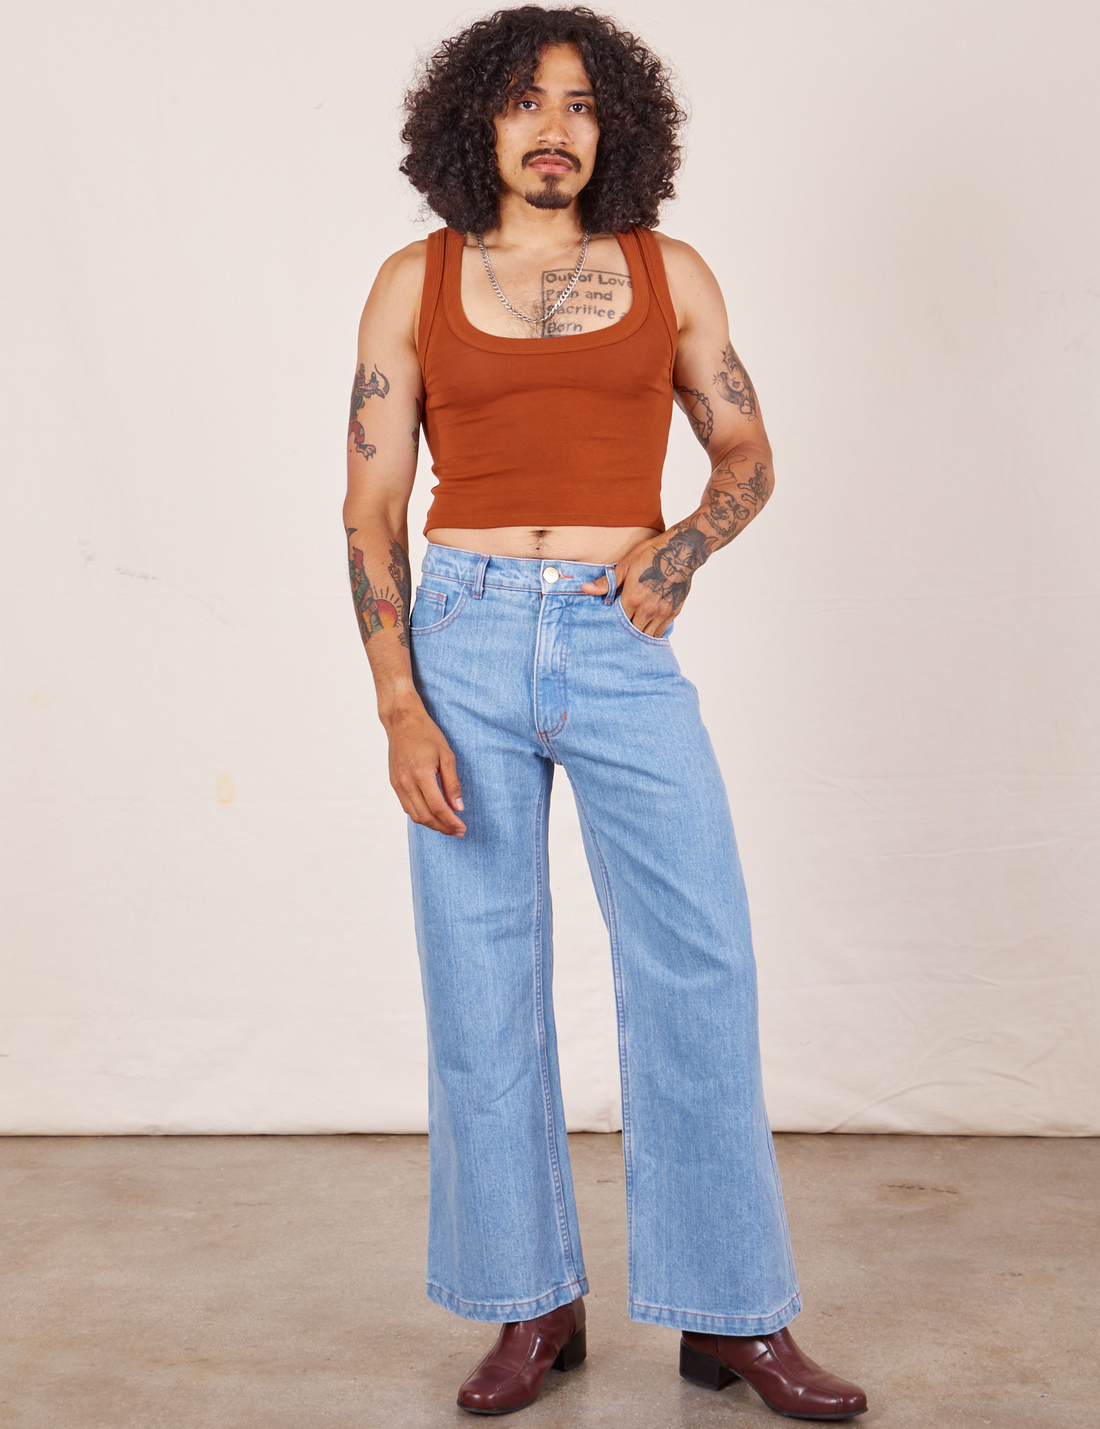 Jesse is wearing Cropped Tank Top in Burnt Terracotta paired with light washed Sailor Jeans